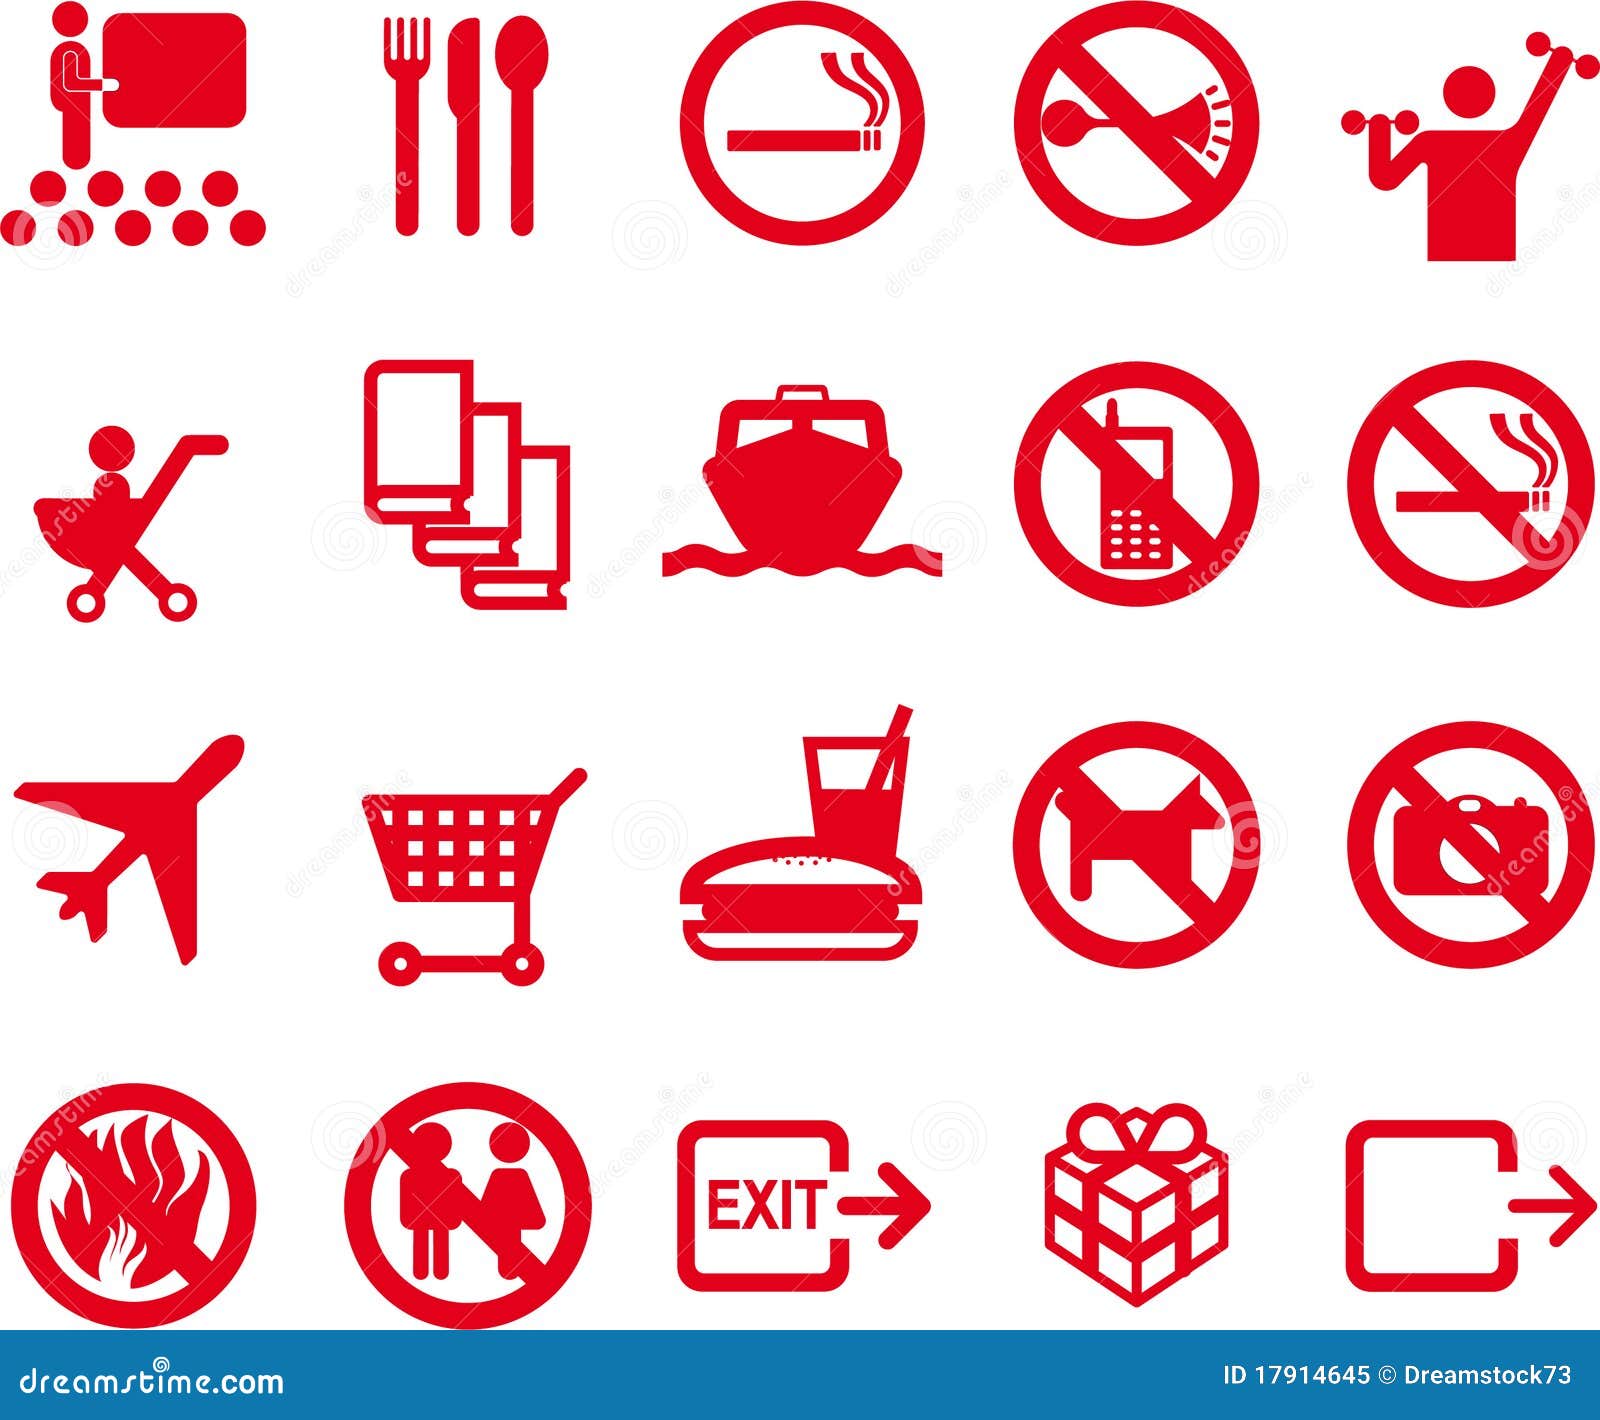 20 icons - recreation, travel, information. 20 different pictograms - tranportation, recreation - red